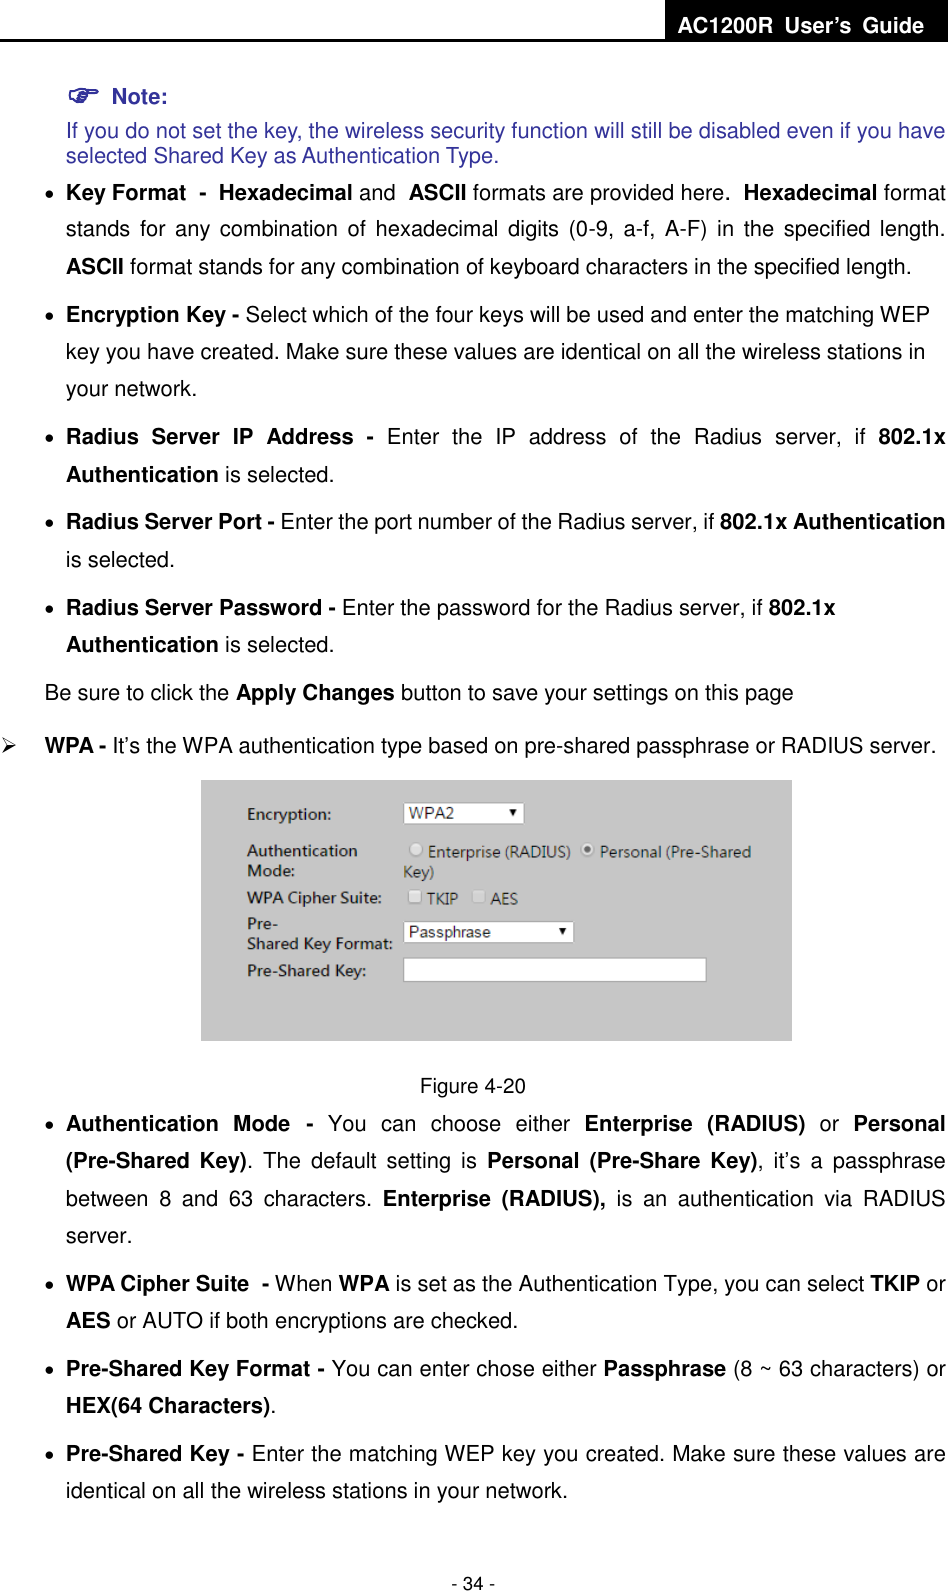  AC1200R  User’s  Guide  - 34 -  Note:   If you do not set the key, the wireless security function will still be disabled even if you have selected Shared Key as Authentication Type.    Key Format - Hexadecimal and ASCII formats are provided here. Hexadecimal format stands for  any combination of hexadecimal digits (0-9,  a-f,  A-F)  in  the specified length. ASCII format stands for any combination of keyboard characters in the specified length.    Encryption Key - Select which of the four keys will be used and enter the matching WEP key you have created. Make sure these values are identical on all the wireless stations in your network.    Radius  Server  IP  Address  -  Enter  the  IP  address  of  the  Radius  server,  if  802.1x Authentication is selected.  Radius Server Port - Enter the port number of the Radius server, if 802.1x Authentication is selected.  Radius Server Password - Enter the password for the Radius server, if 802.1x Authentication is selected. Be sure to click the Apply Changes button to save your settings on this page  WPA - It’s the WPA authentication type based on pre-shared passphrase or RADIUS server.    Figure 4-20  Authentication  Mode -  You  can  choose  either  Enterprise  (RADIUS) or Personal (Pre-Shared  Key).  The  default  setting  is  Personal  (Pre-Share  Key),  it’s  a  passphrase between  8  and  63  characters.  Enterprise  (RADIUS),  is  an  authentication  via  RADIUS server.  WPA Cipher Suite - When WPA is set as the Authentication Type, you can select TKIP or AES or AUTO if both encryptions are checked.  Pre-Shared Key Format - You can enter chose either Passphrase (8 ~ 63 characters) or HEX(64 Characters).      Pre-Shared Key - Enter the matching WEP key you created. Make sure these values are identical on all the wireless stations in your network. 